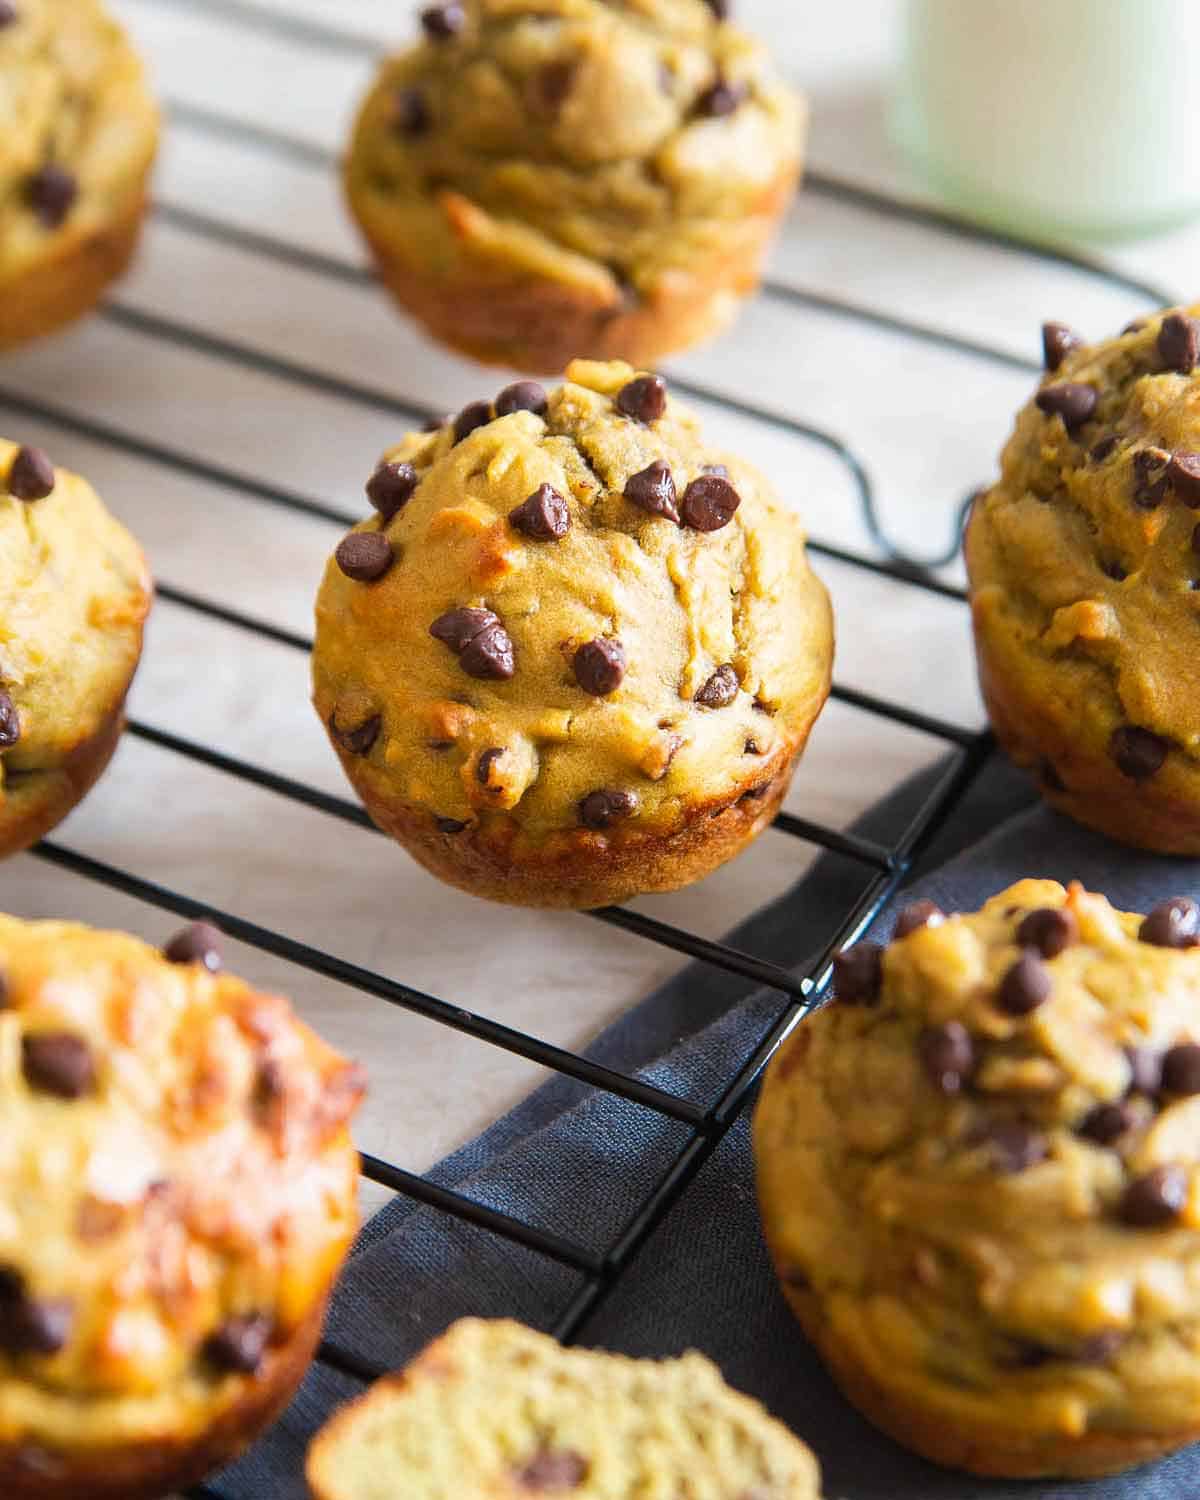 Avocado muffins sweetened with banana and honey are a healthy, wholesome snack you'll love.